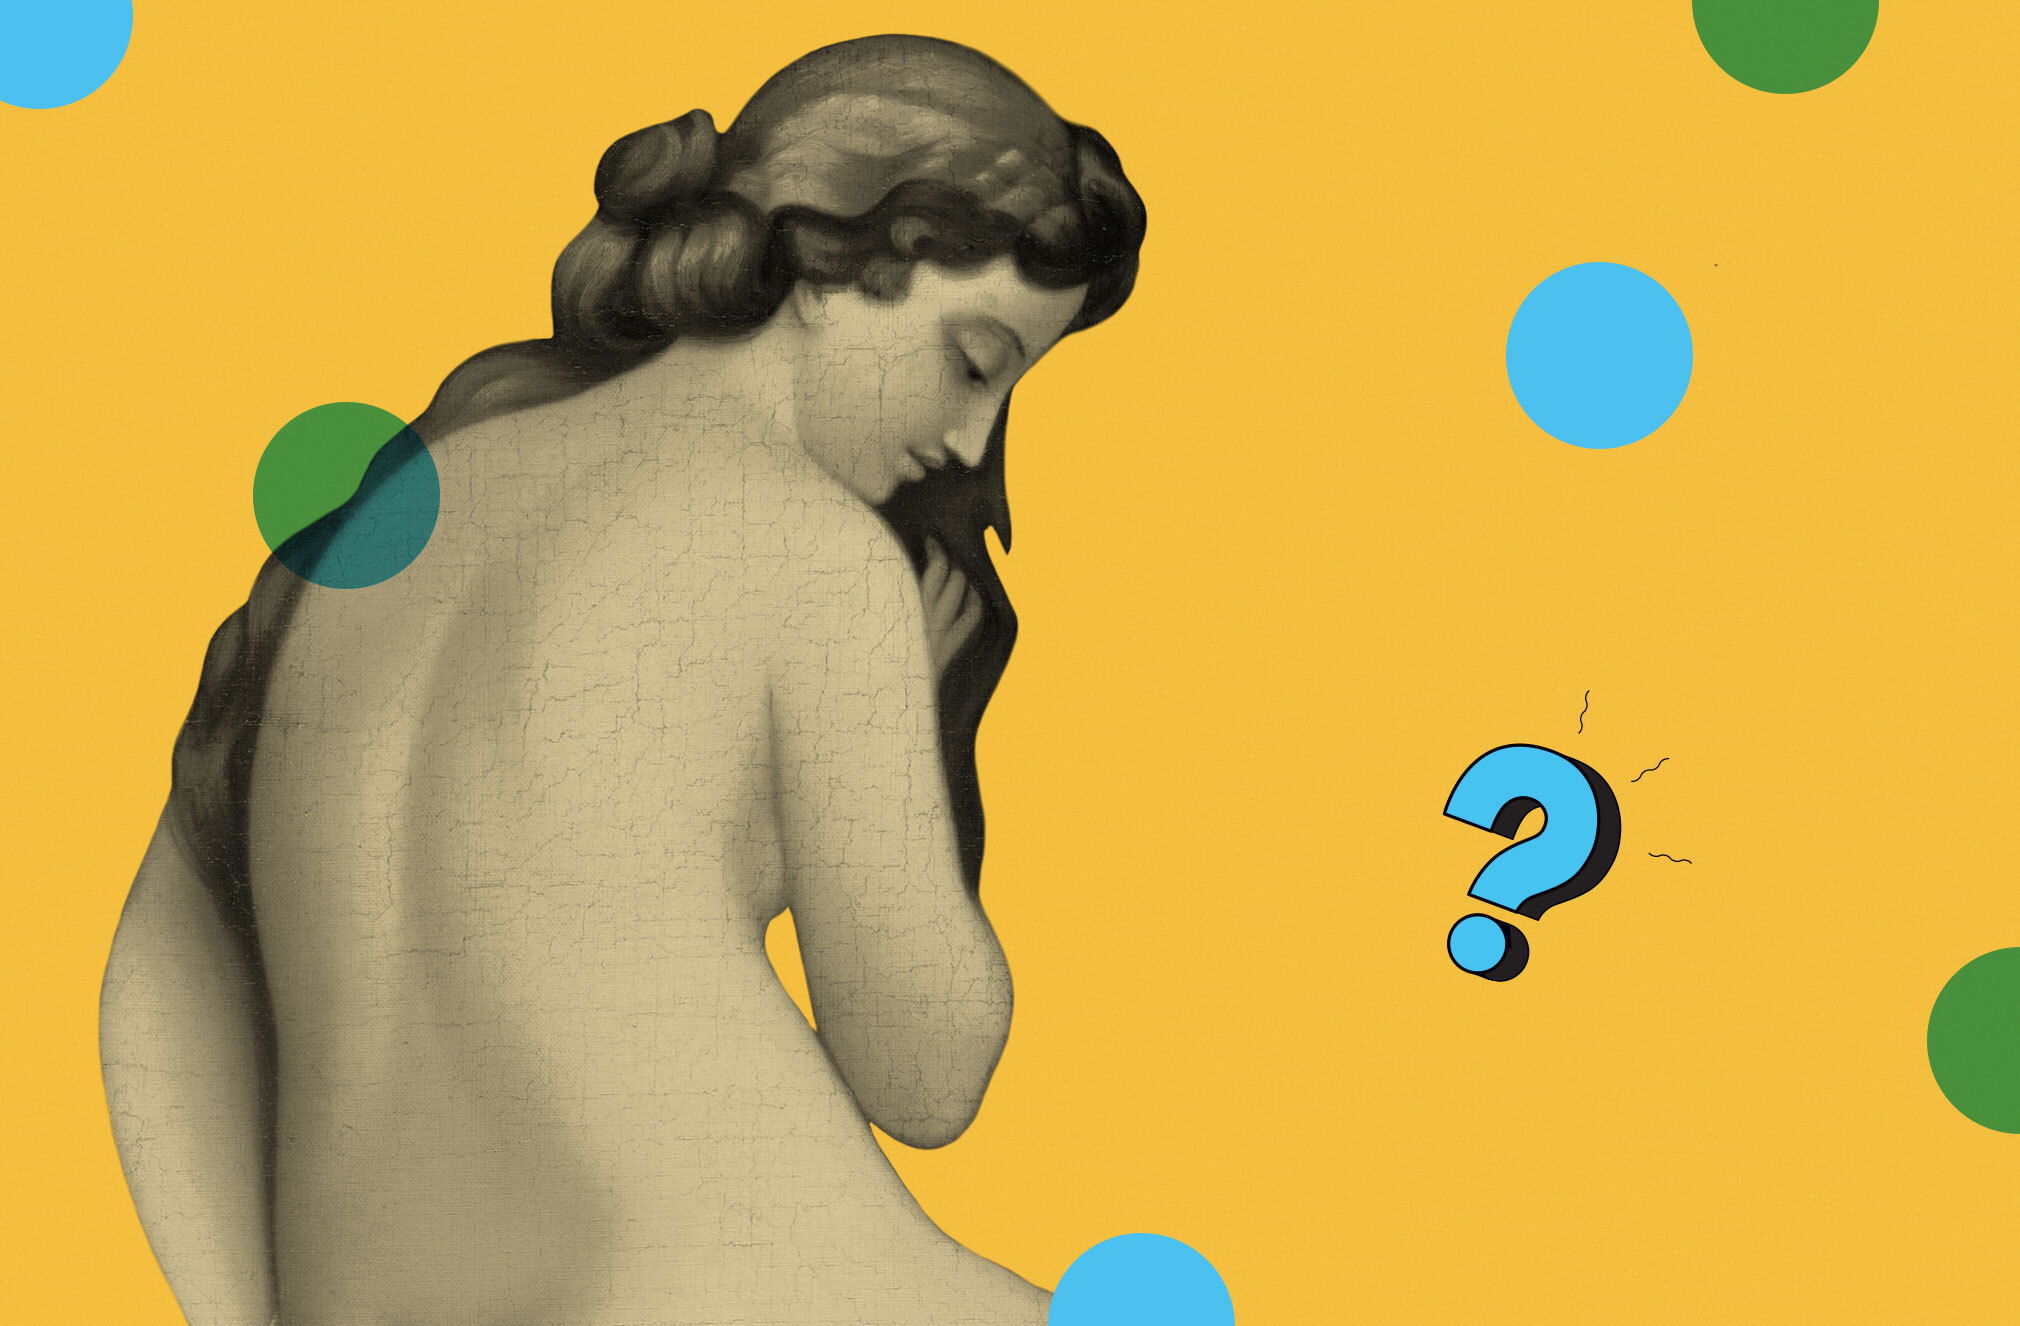 Coccozella Nudists - How can you safely send nudes? | Popular Science